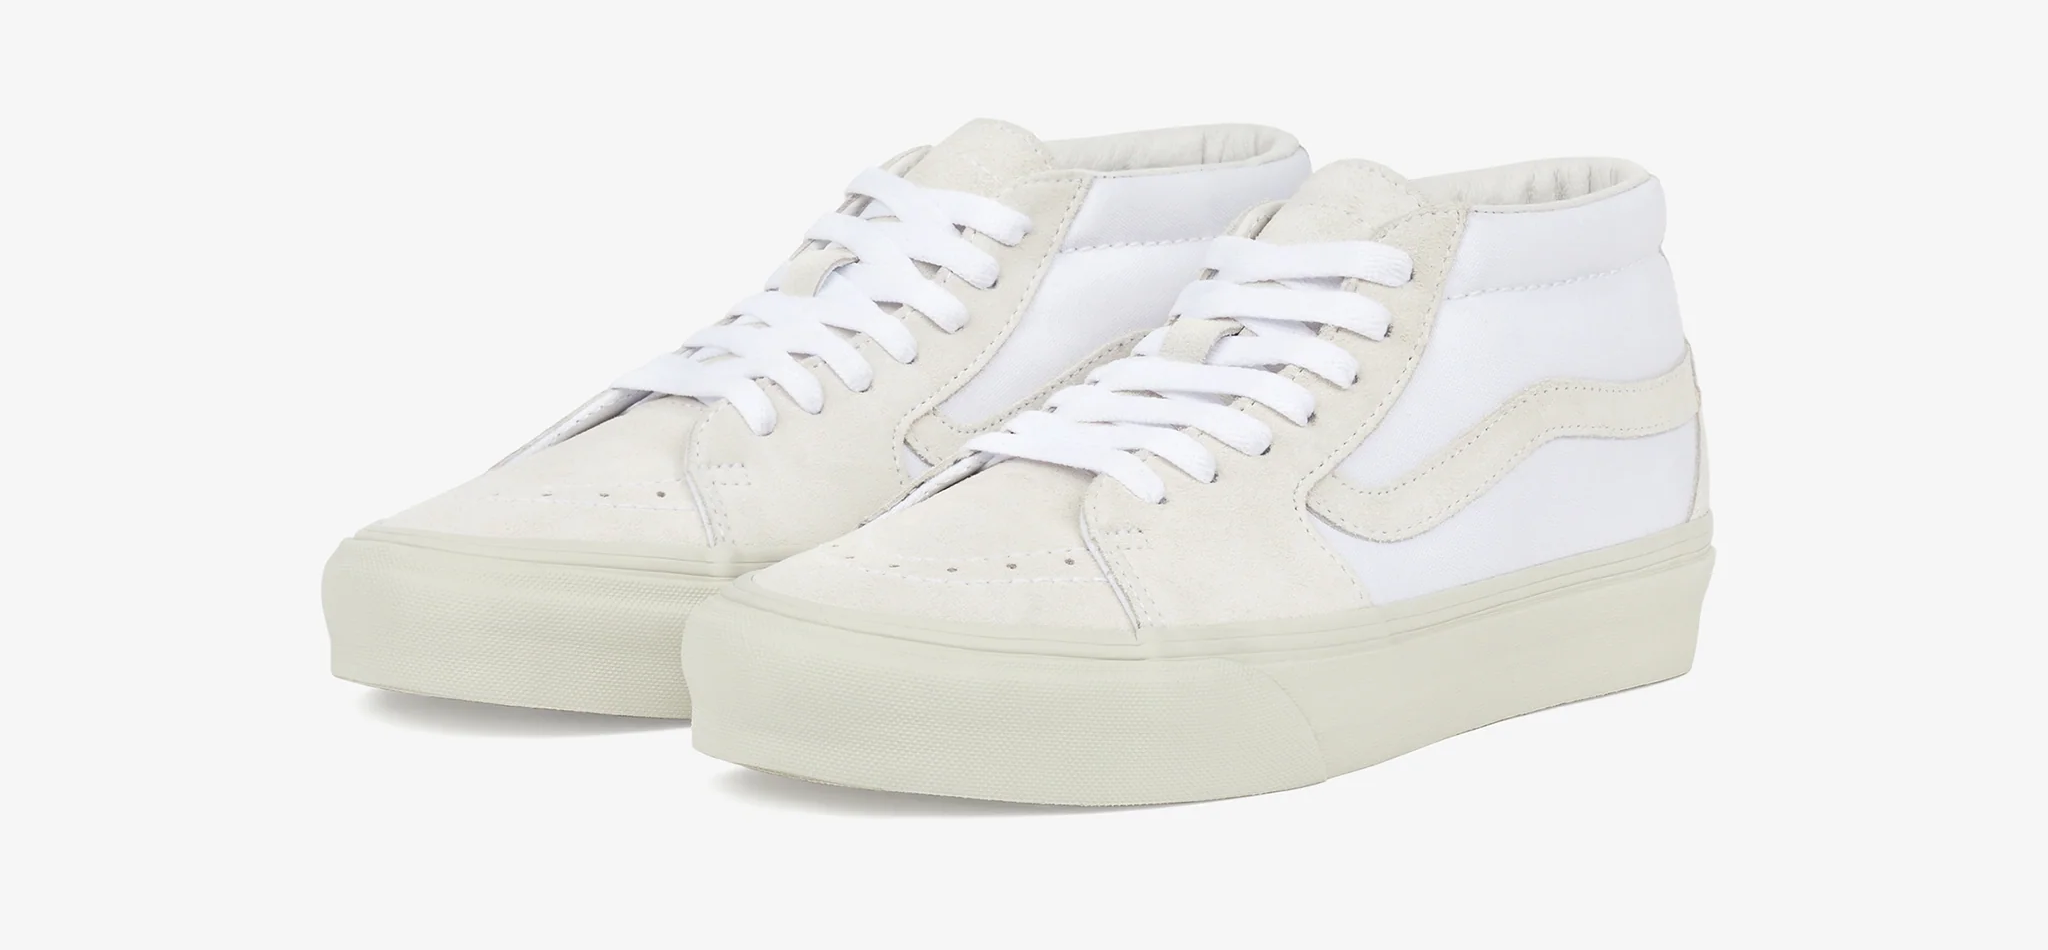 A clean product shot of JJJJound Sk8-Mid VLT LX Sneakers.